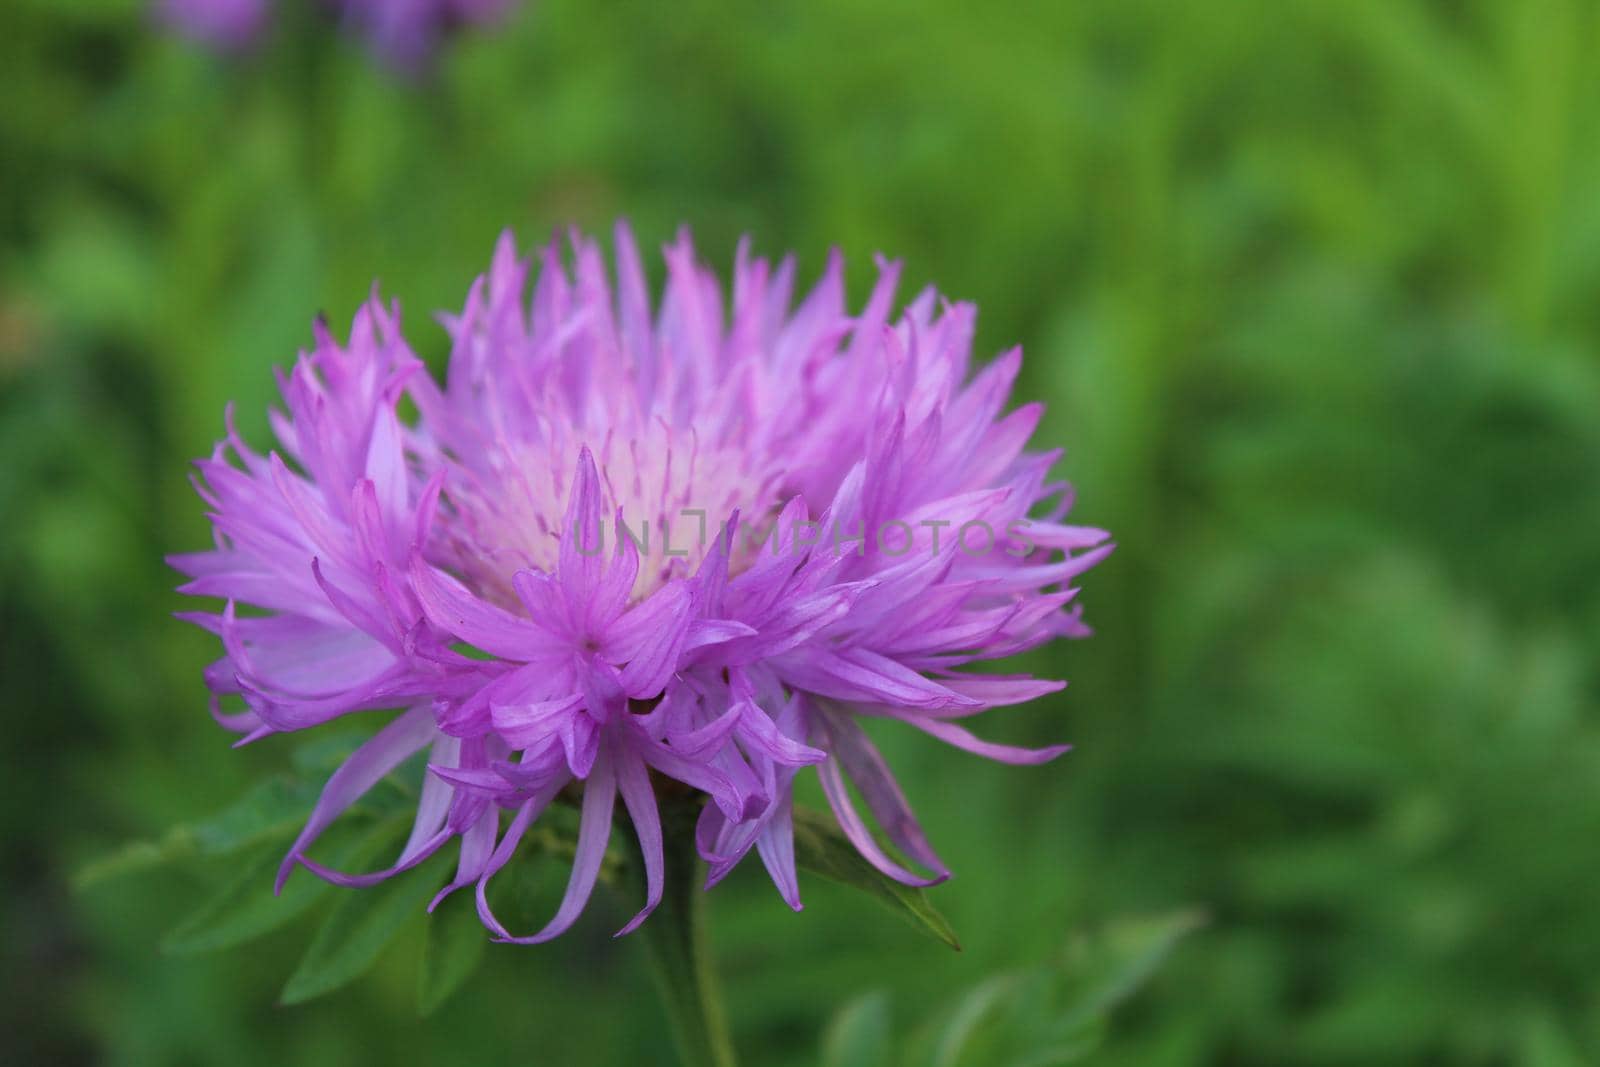 The flower of the asters is lilac-colored against the green grass close-up. View from above Aster bush. Centaurea Dealbata by Shoba